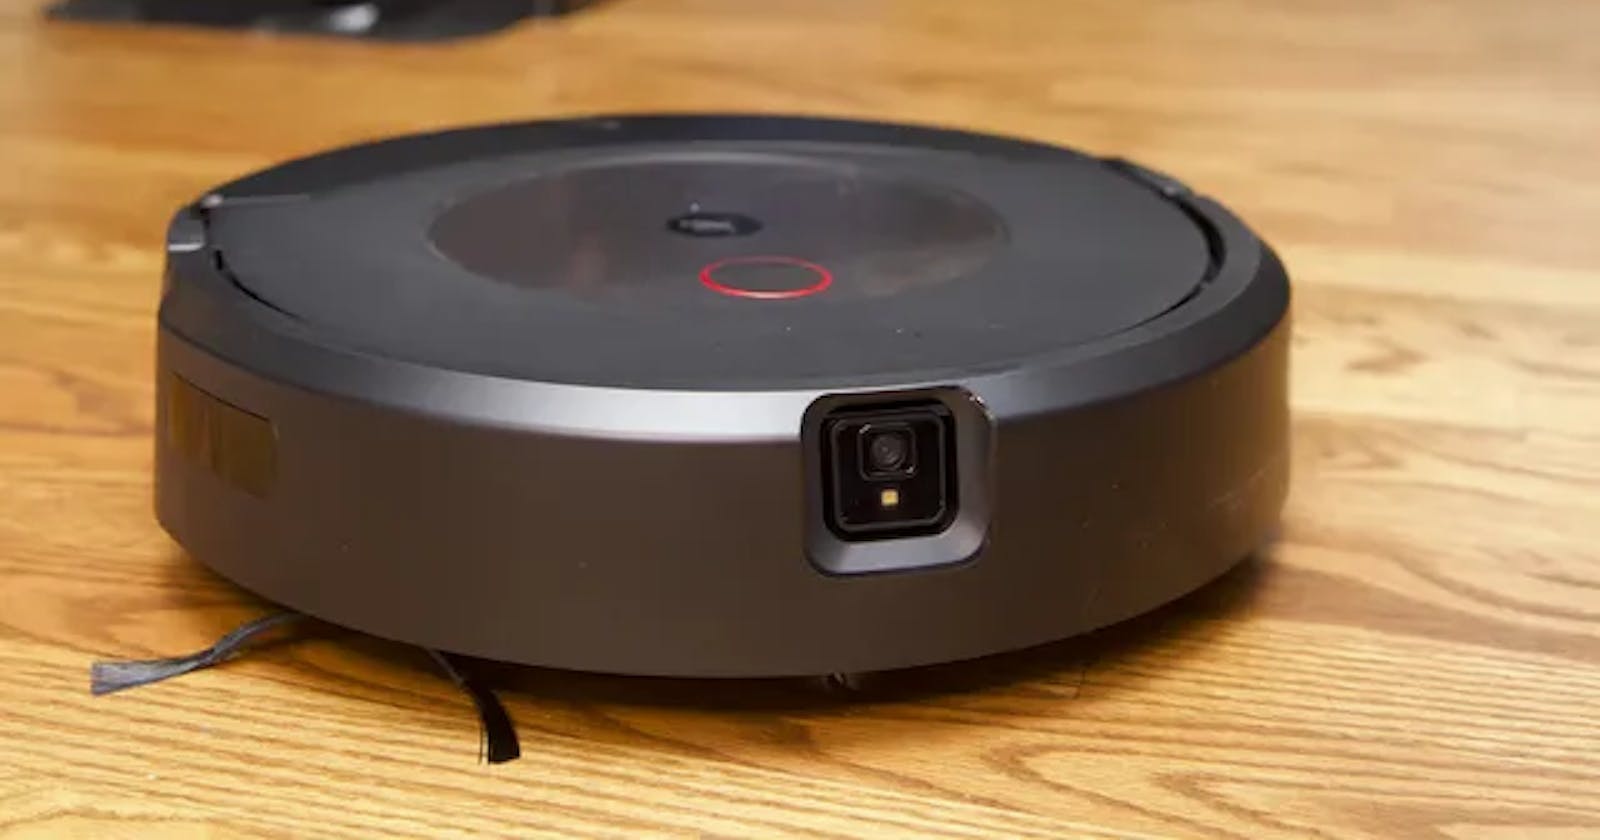 iRobot loses market share to Chinese competitors, after Amazon drops buyout. The company struggles in robot vacuum sector since 2014.